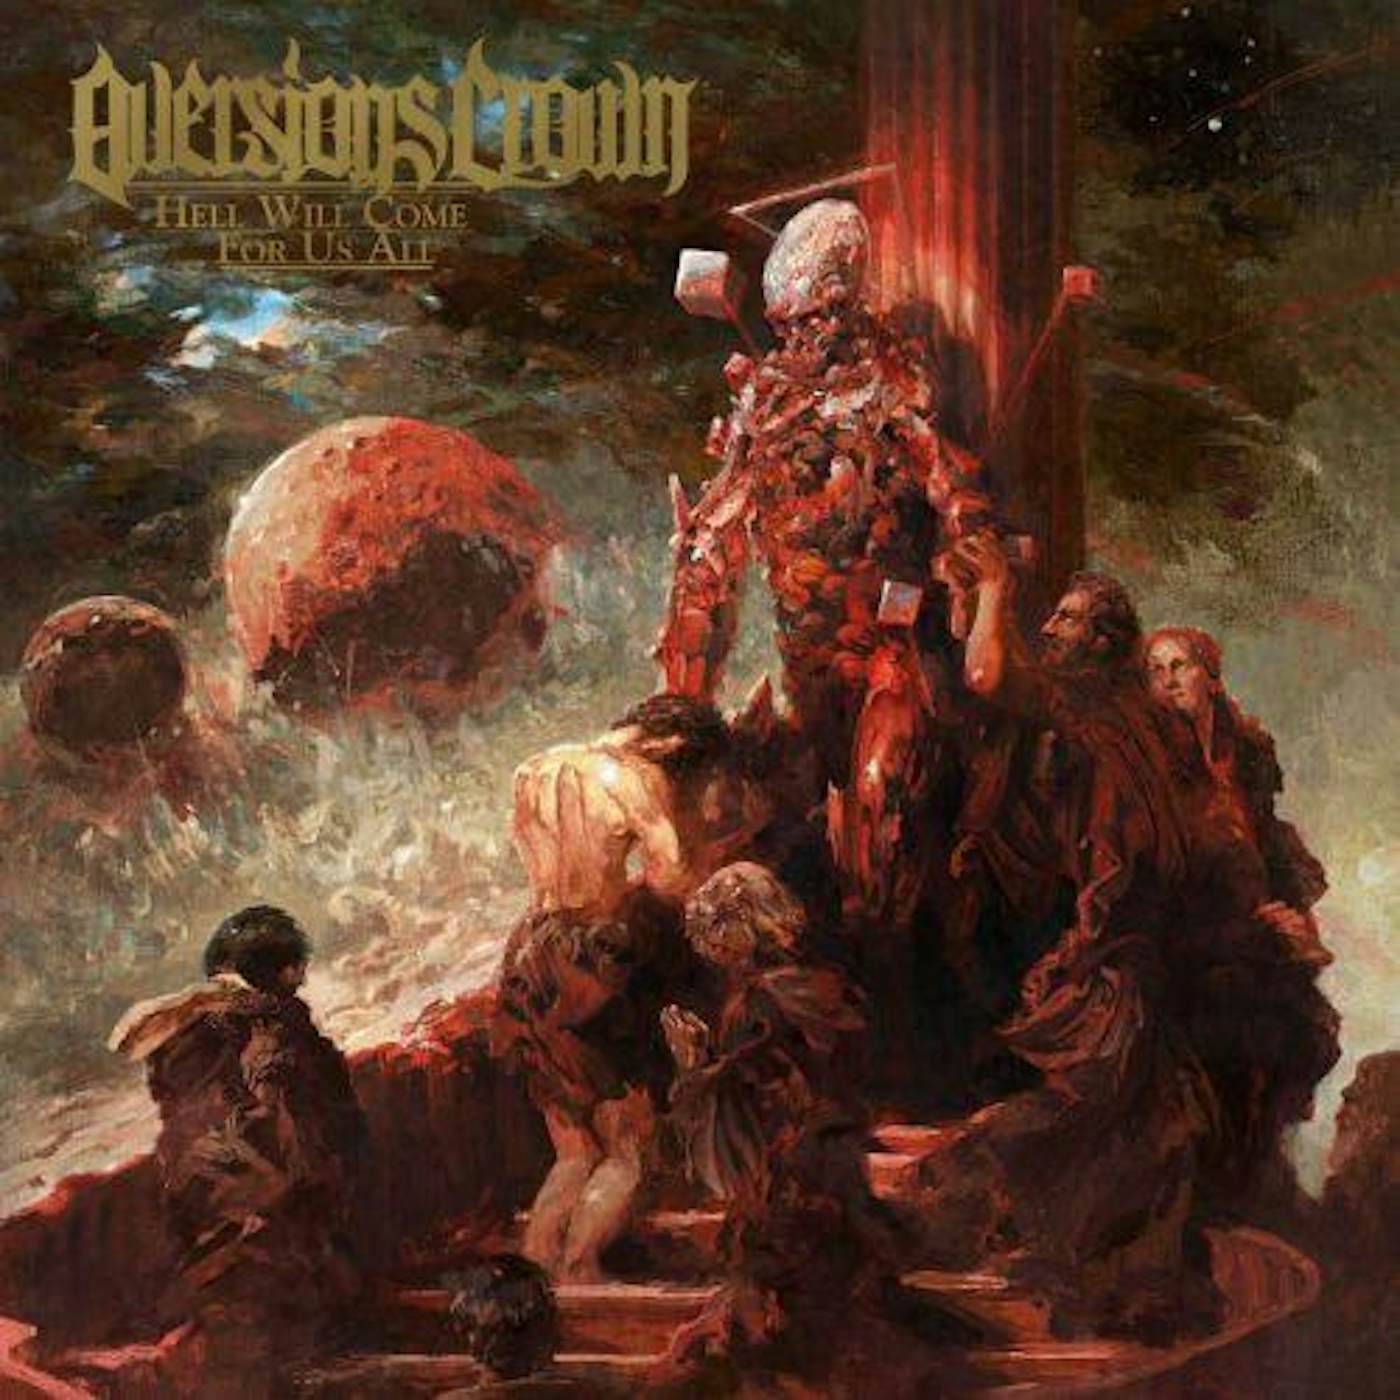 Aversions Crown HELL WILL COME FOR US ALL CD